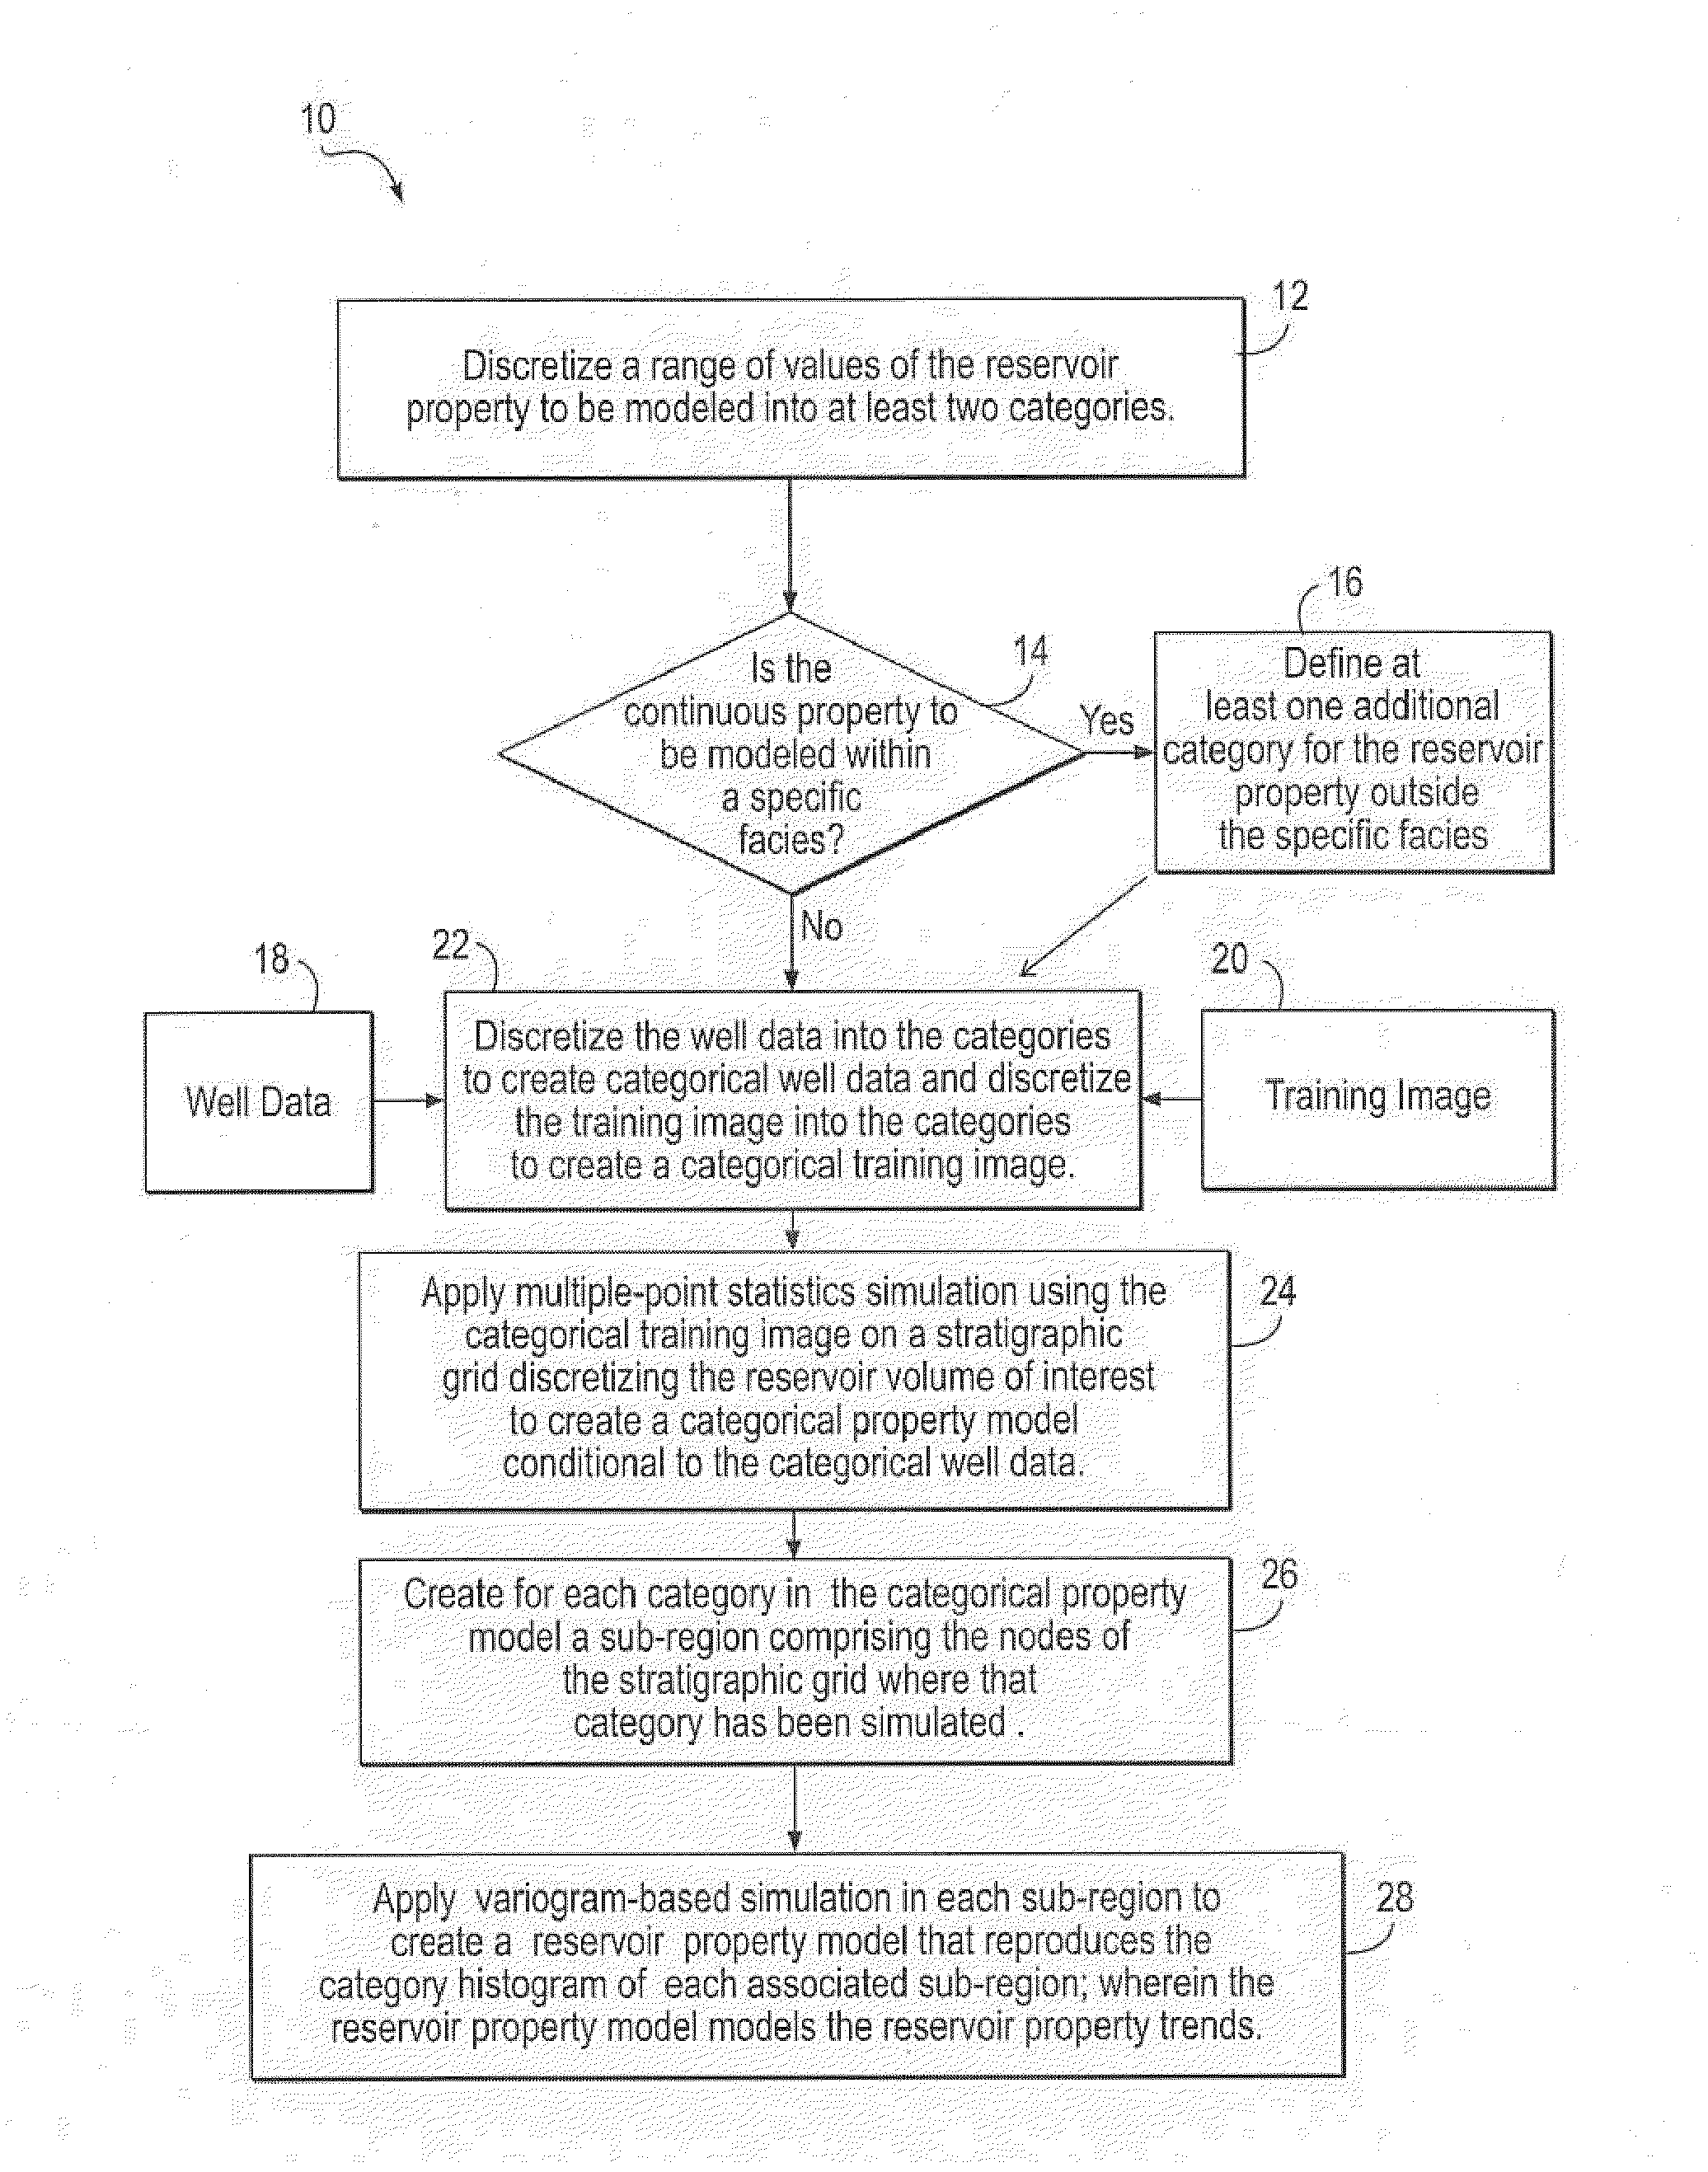 Method and system for using multiple-point statistics simulation to model reservoir property trends